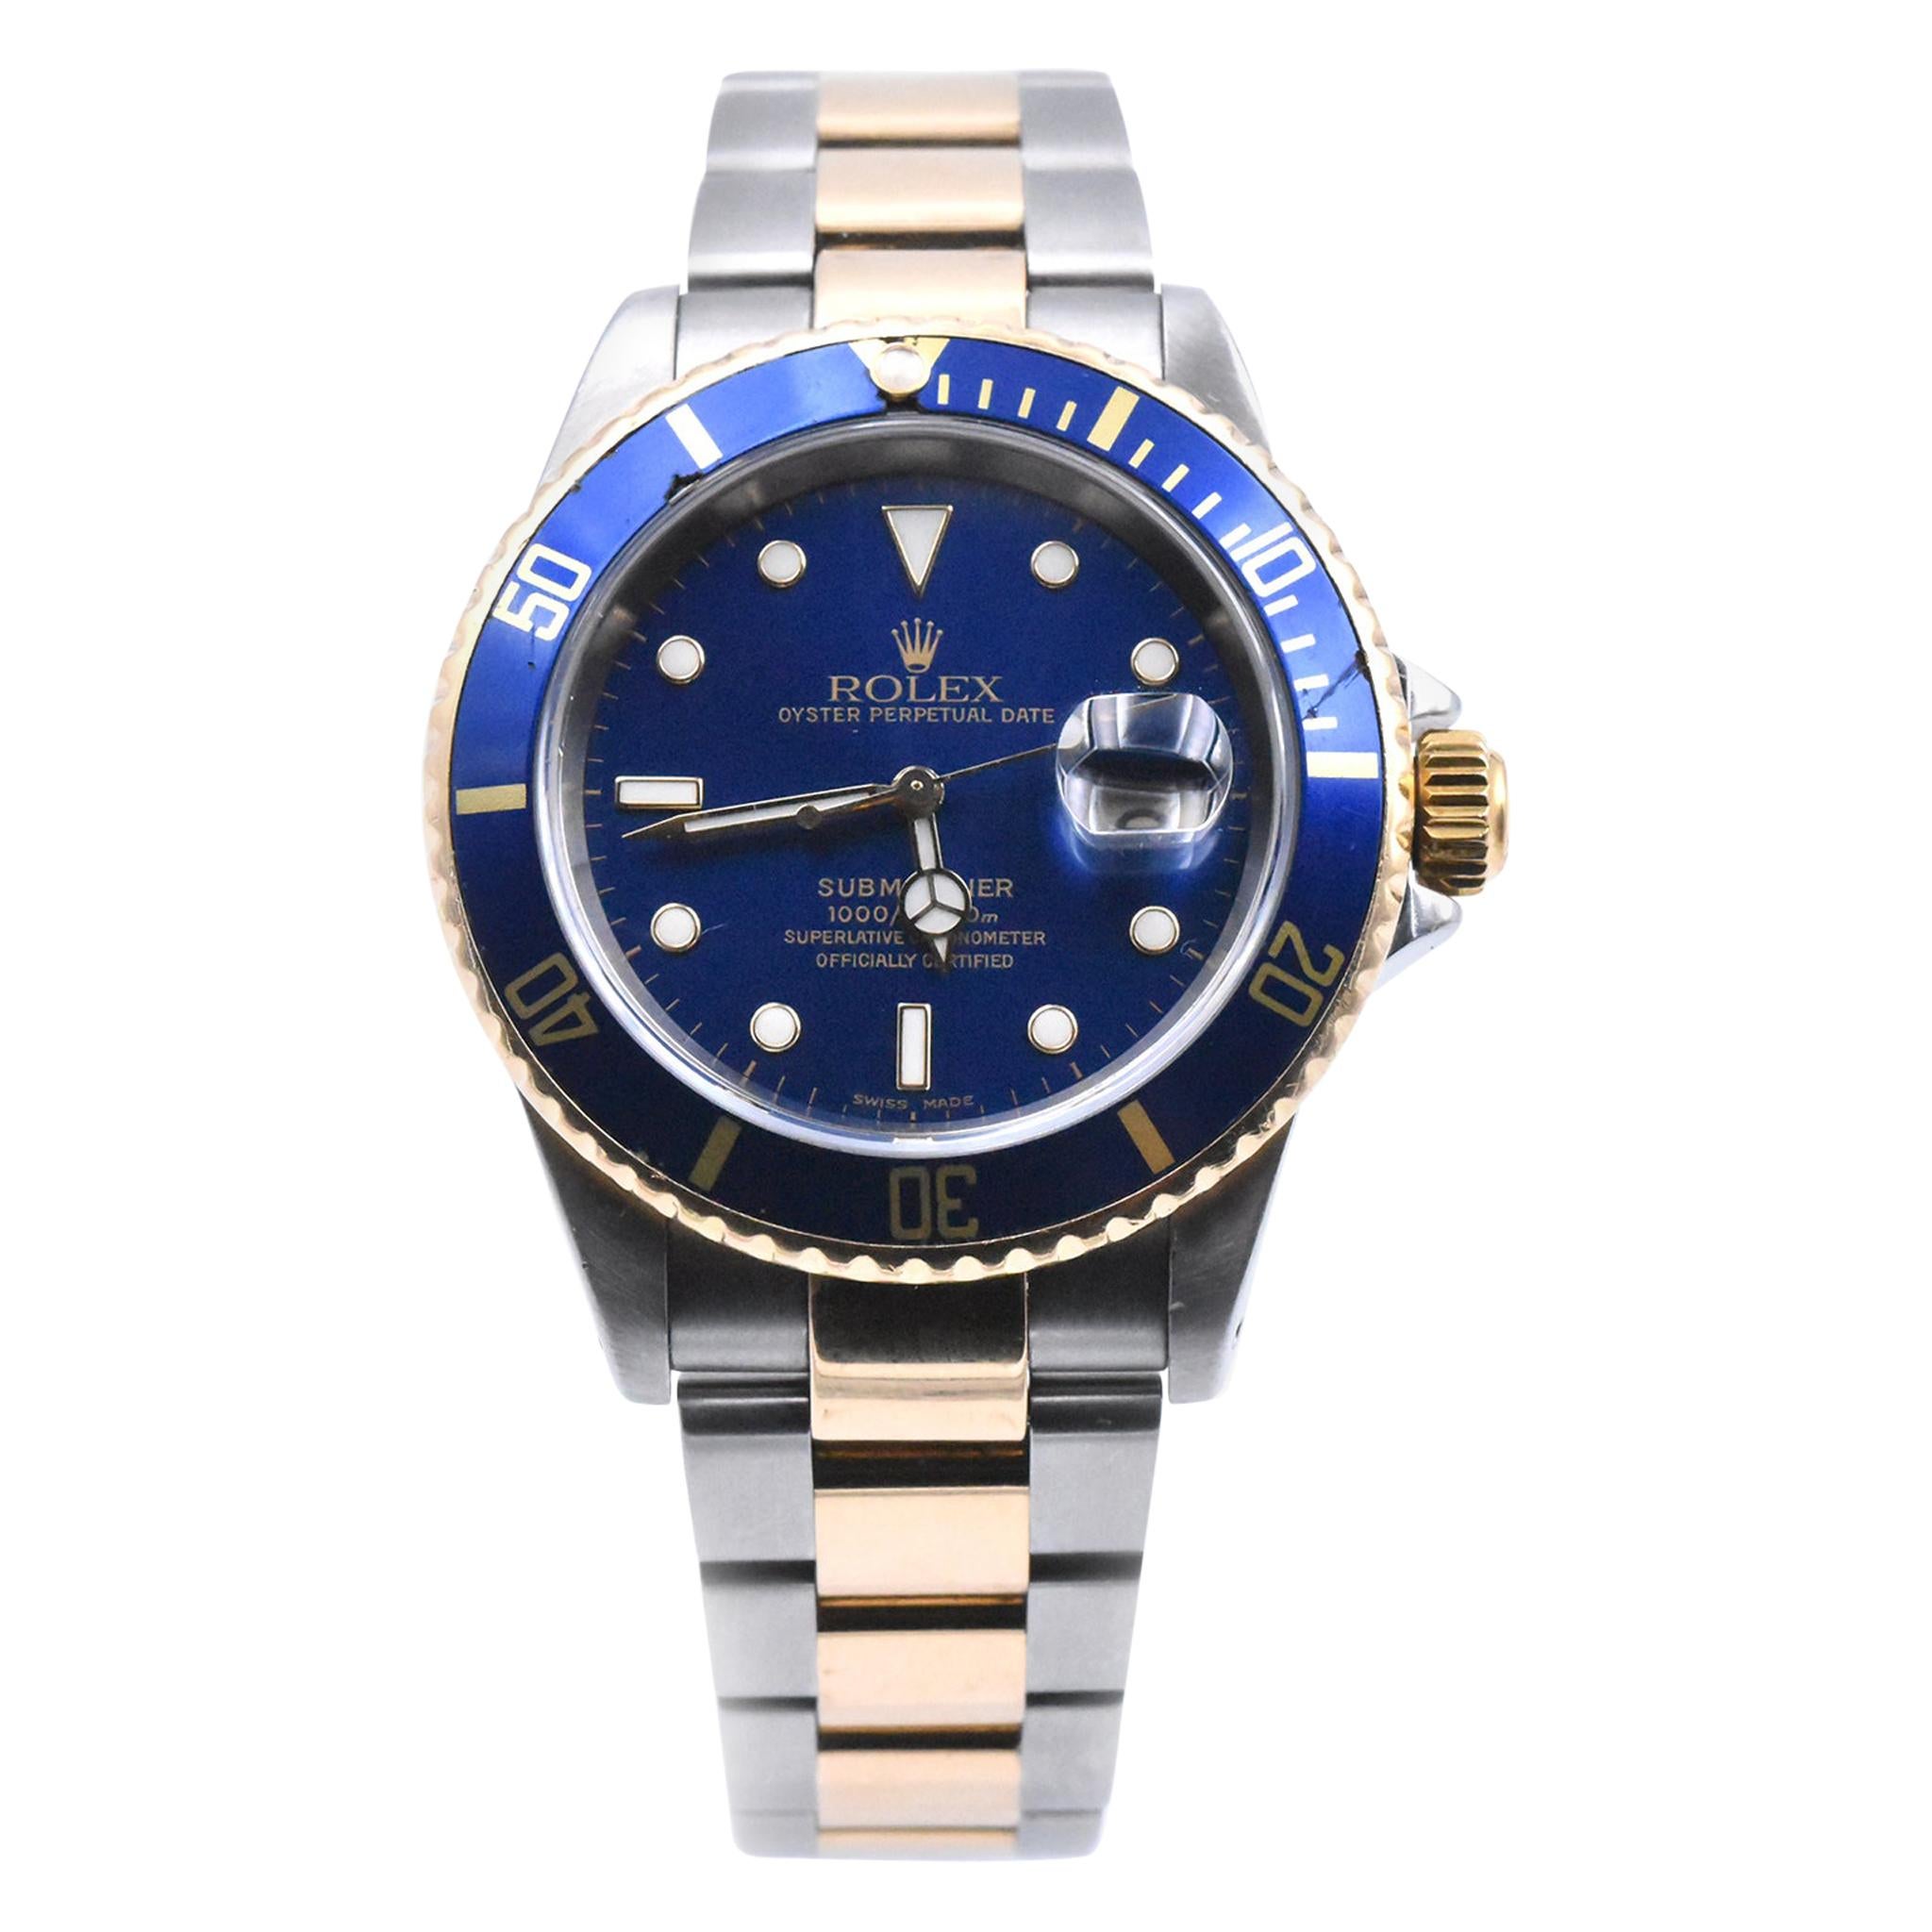 Rolex Submariner Two-Tone Blue Dial Watch Ref 16613